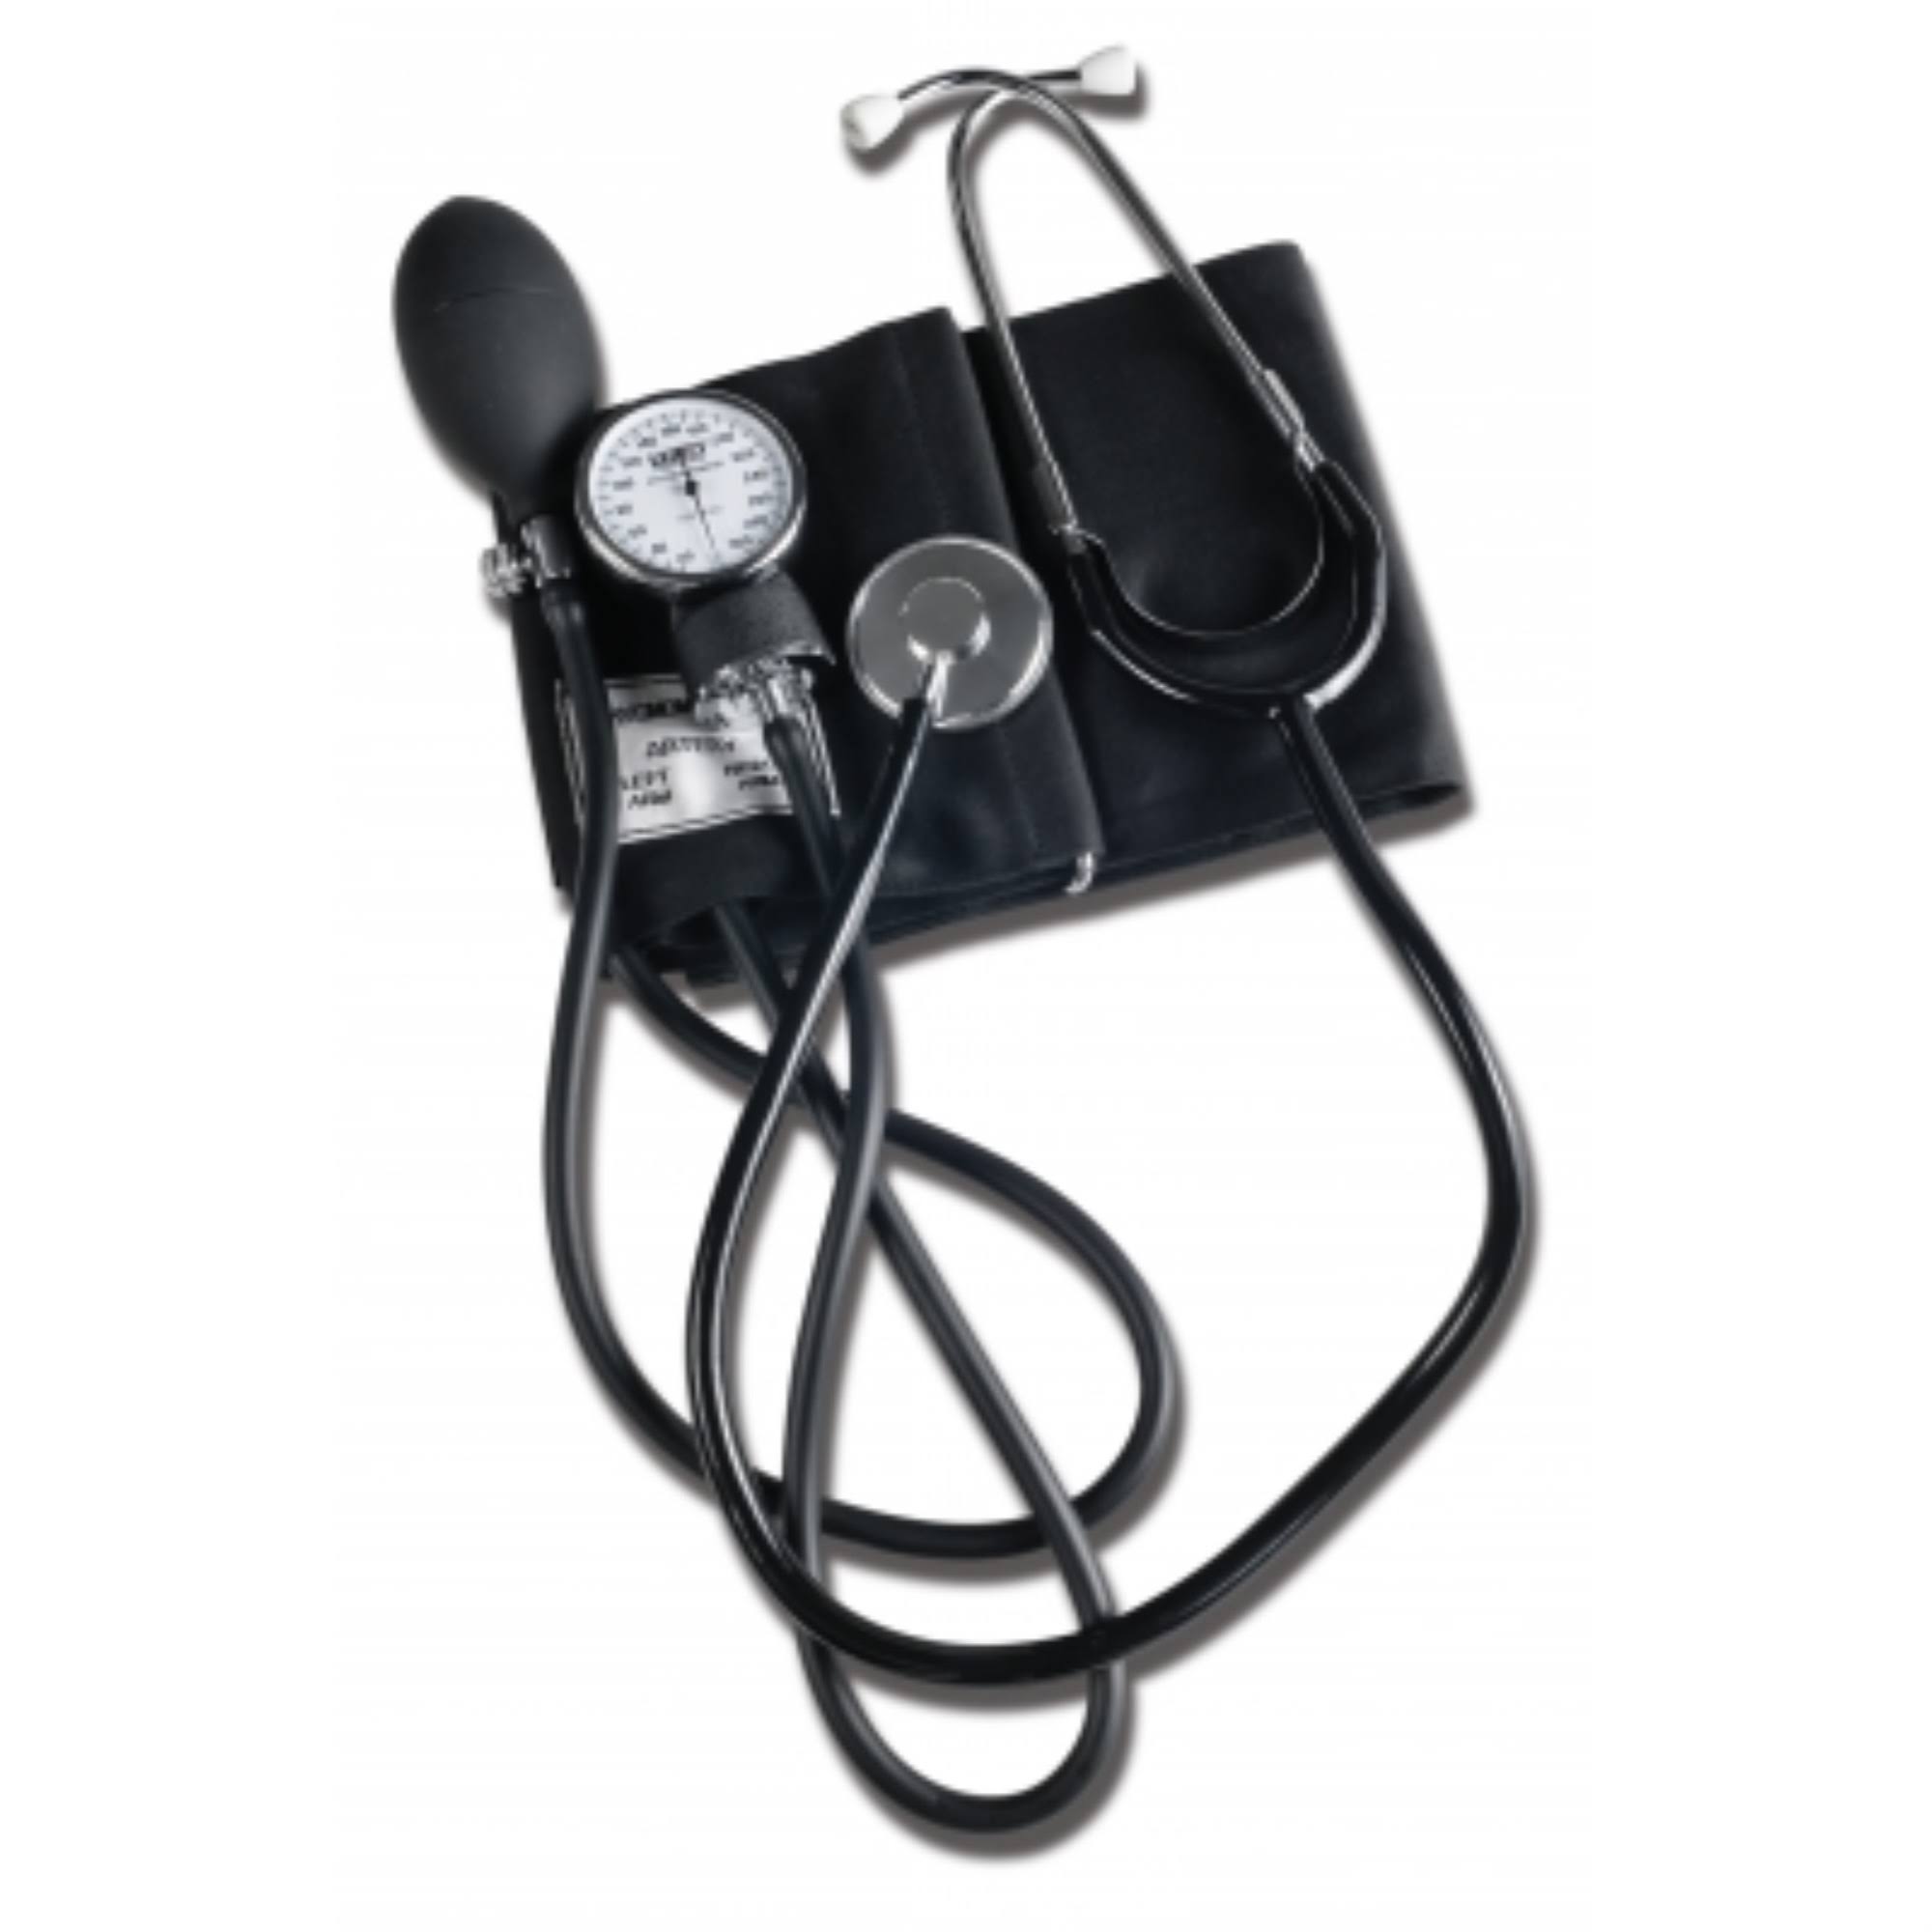 Labtron 240X Home Blood Pressure Kit - with Separate Stethoscope